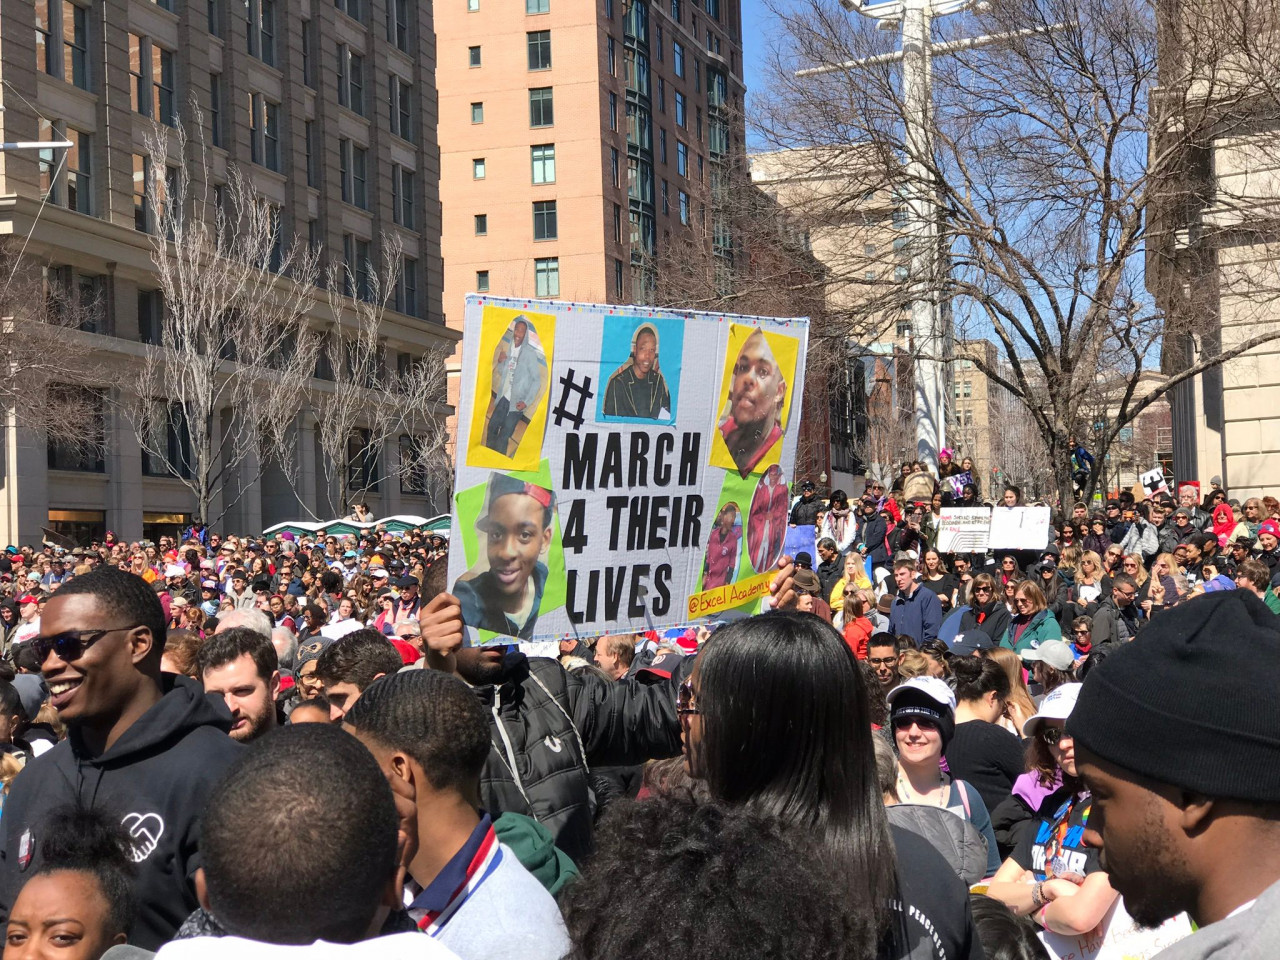 <a class="bx-tag" rel="tag" href="https://wethepeople.care/page/view-channel-profile?id=1050"><s>#</s><b>MFOL</b></a> - March for black teen lives